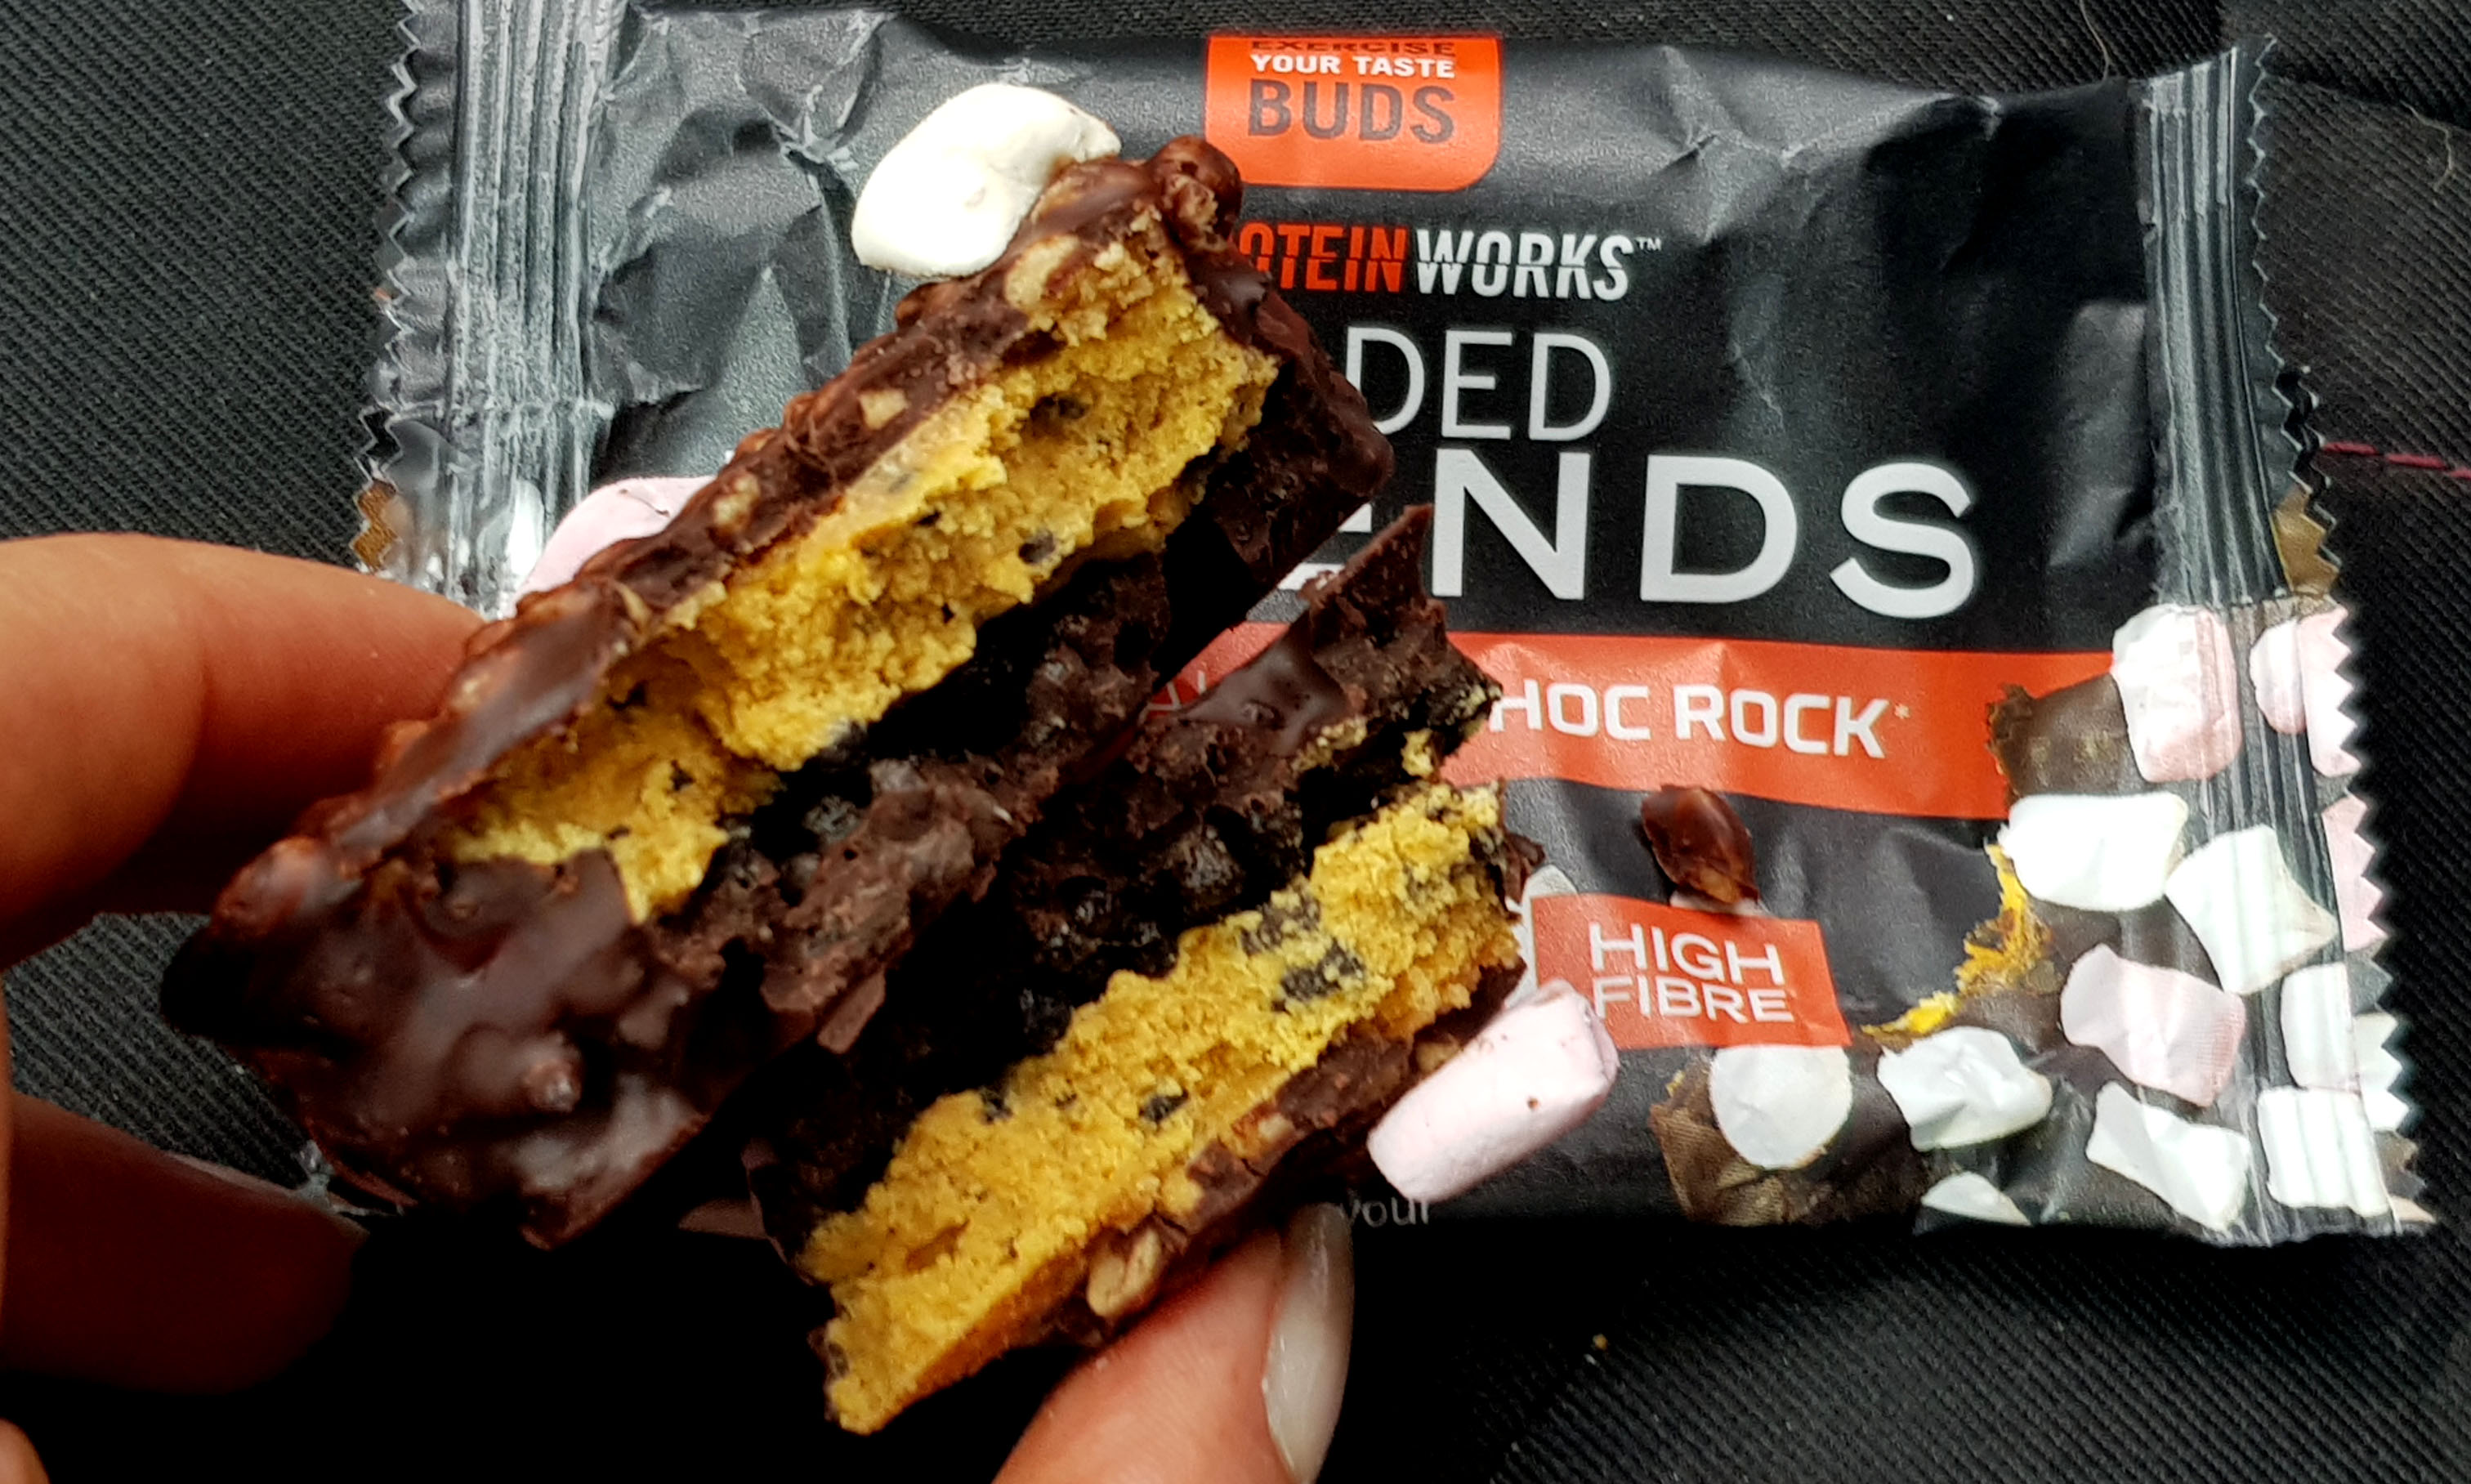 Protein Works Loaded Legends Marshmallow Choc Rock